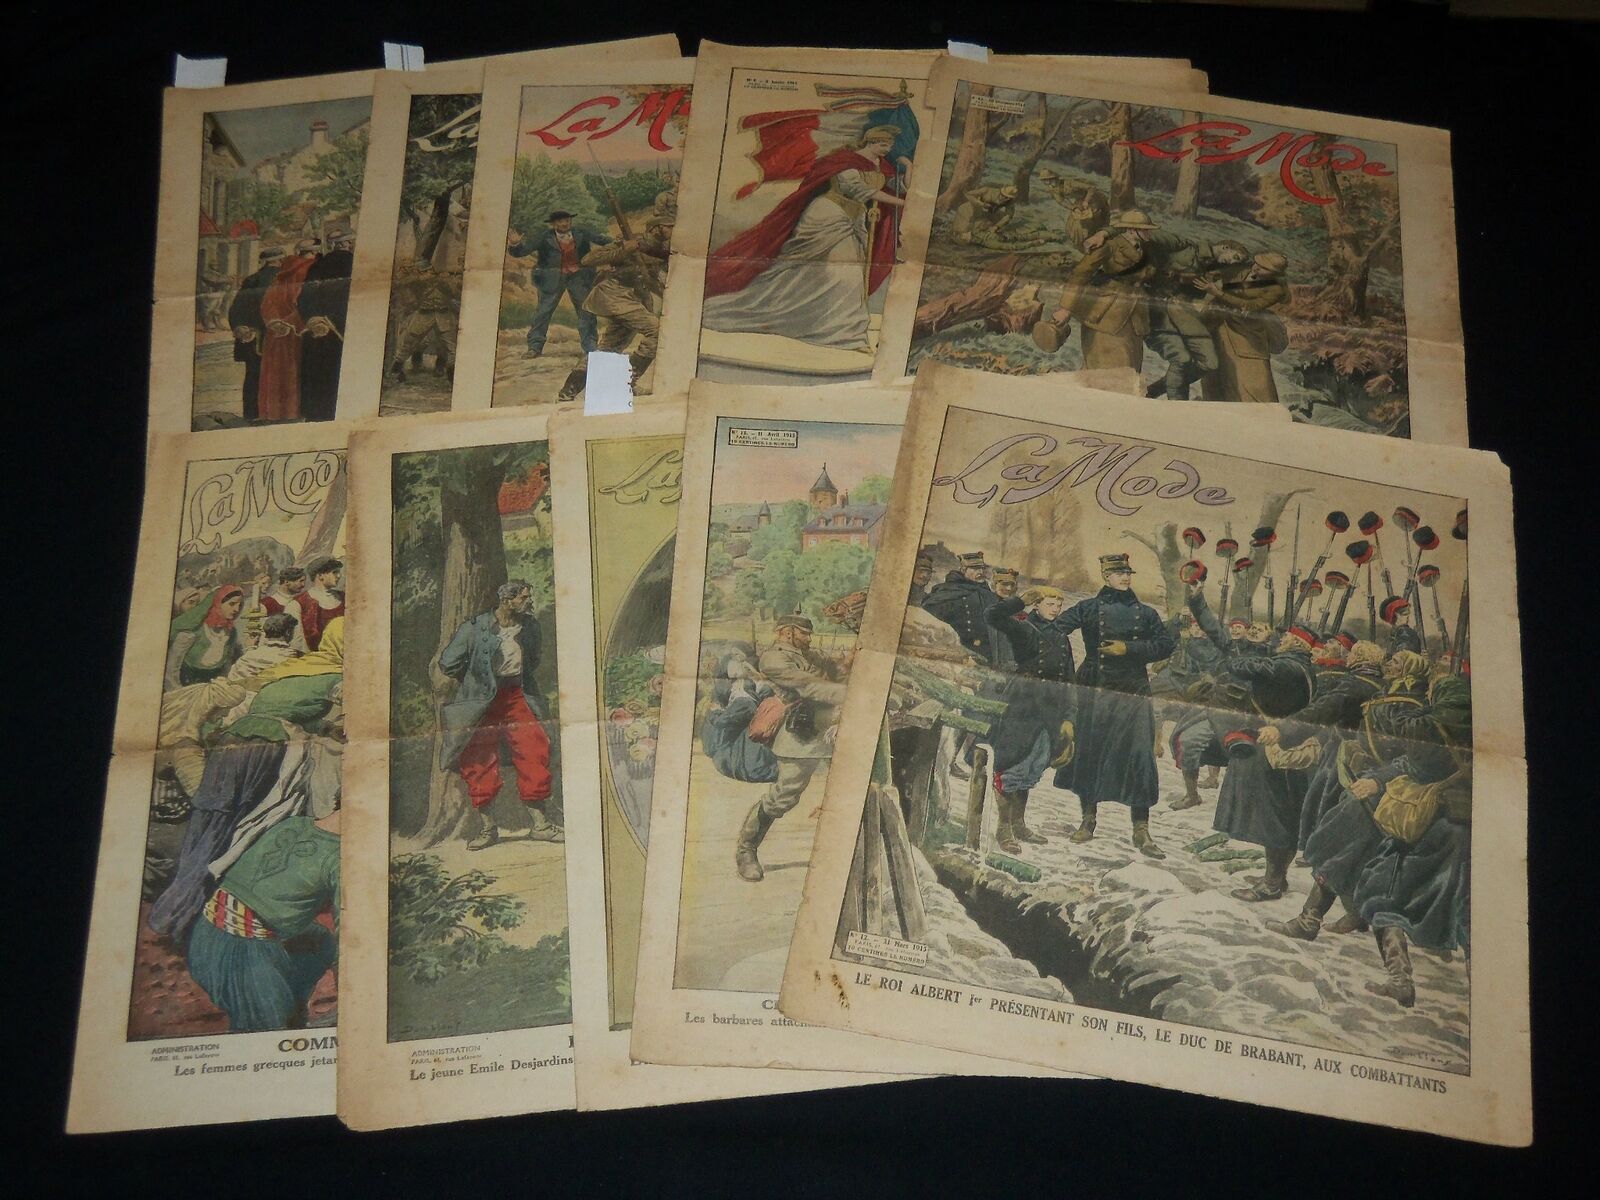 1914-1915 LA MODE FRENCH NEWSPAPERS LOT OF 10 ISSUES - WWI COVERS - O 312